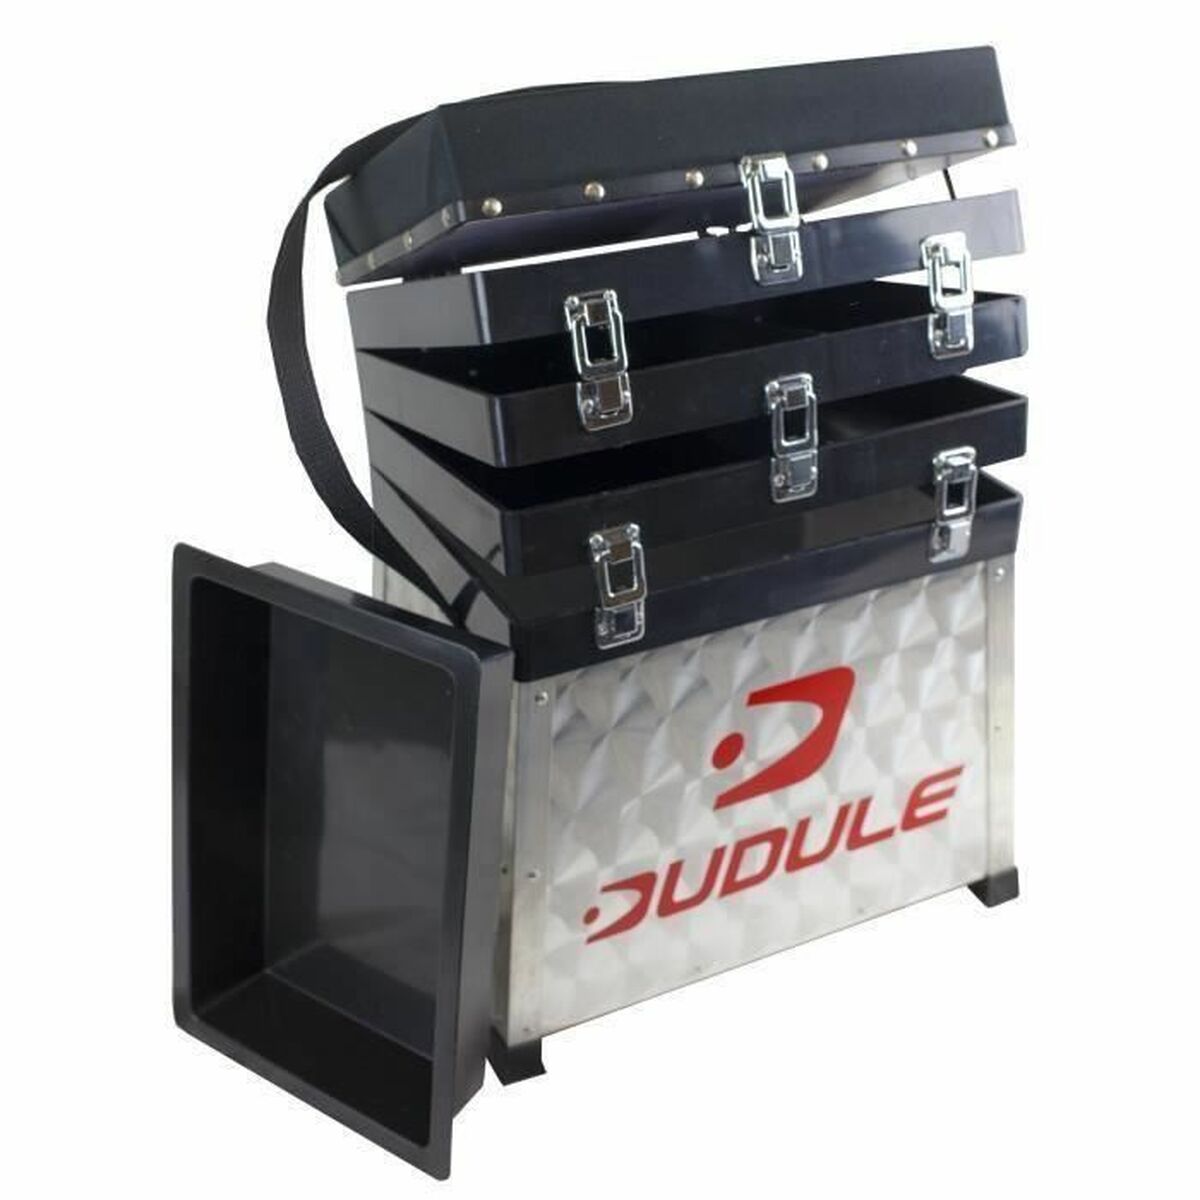 Box DUDULE 3 Compartments